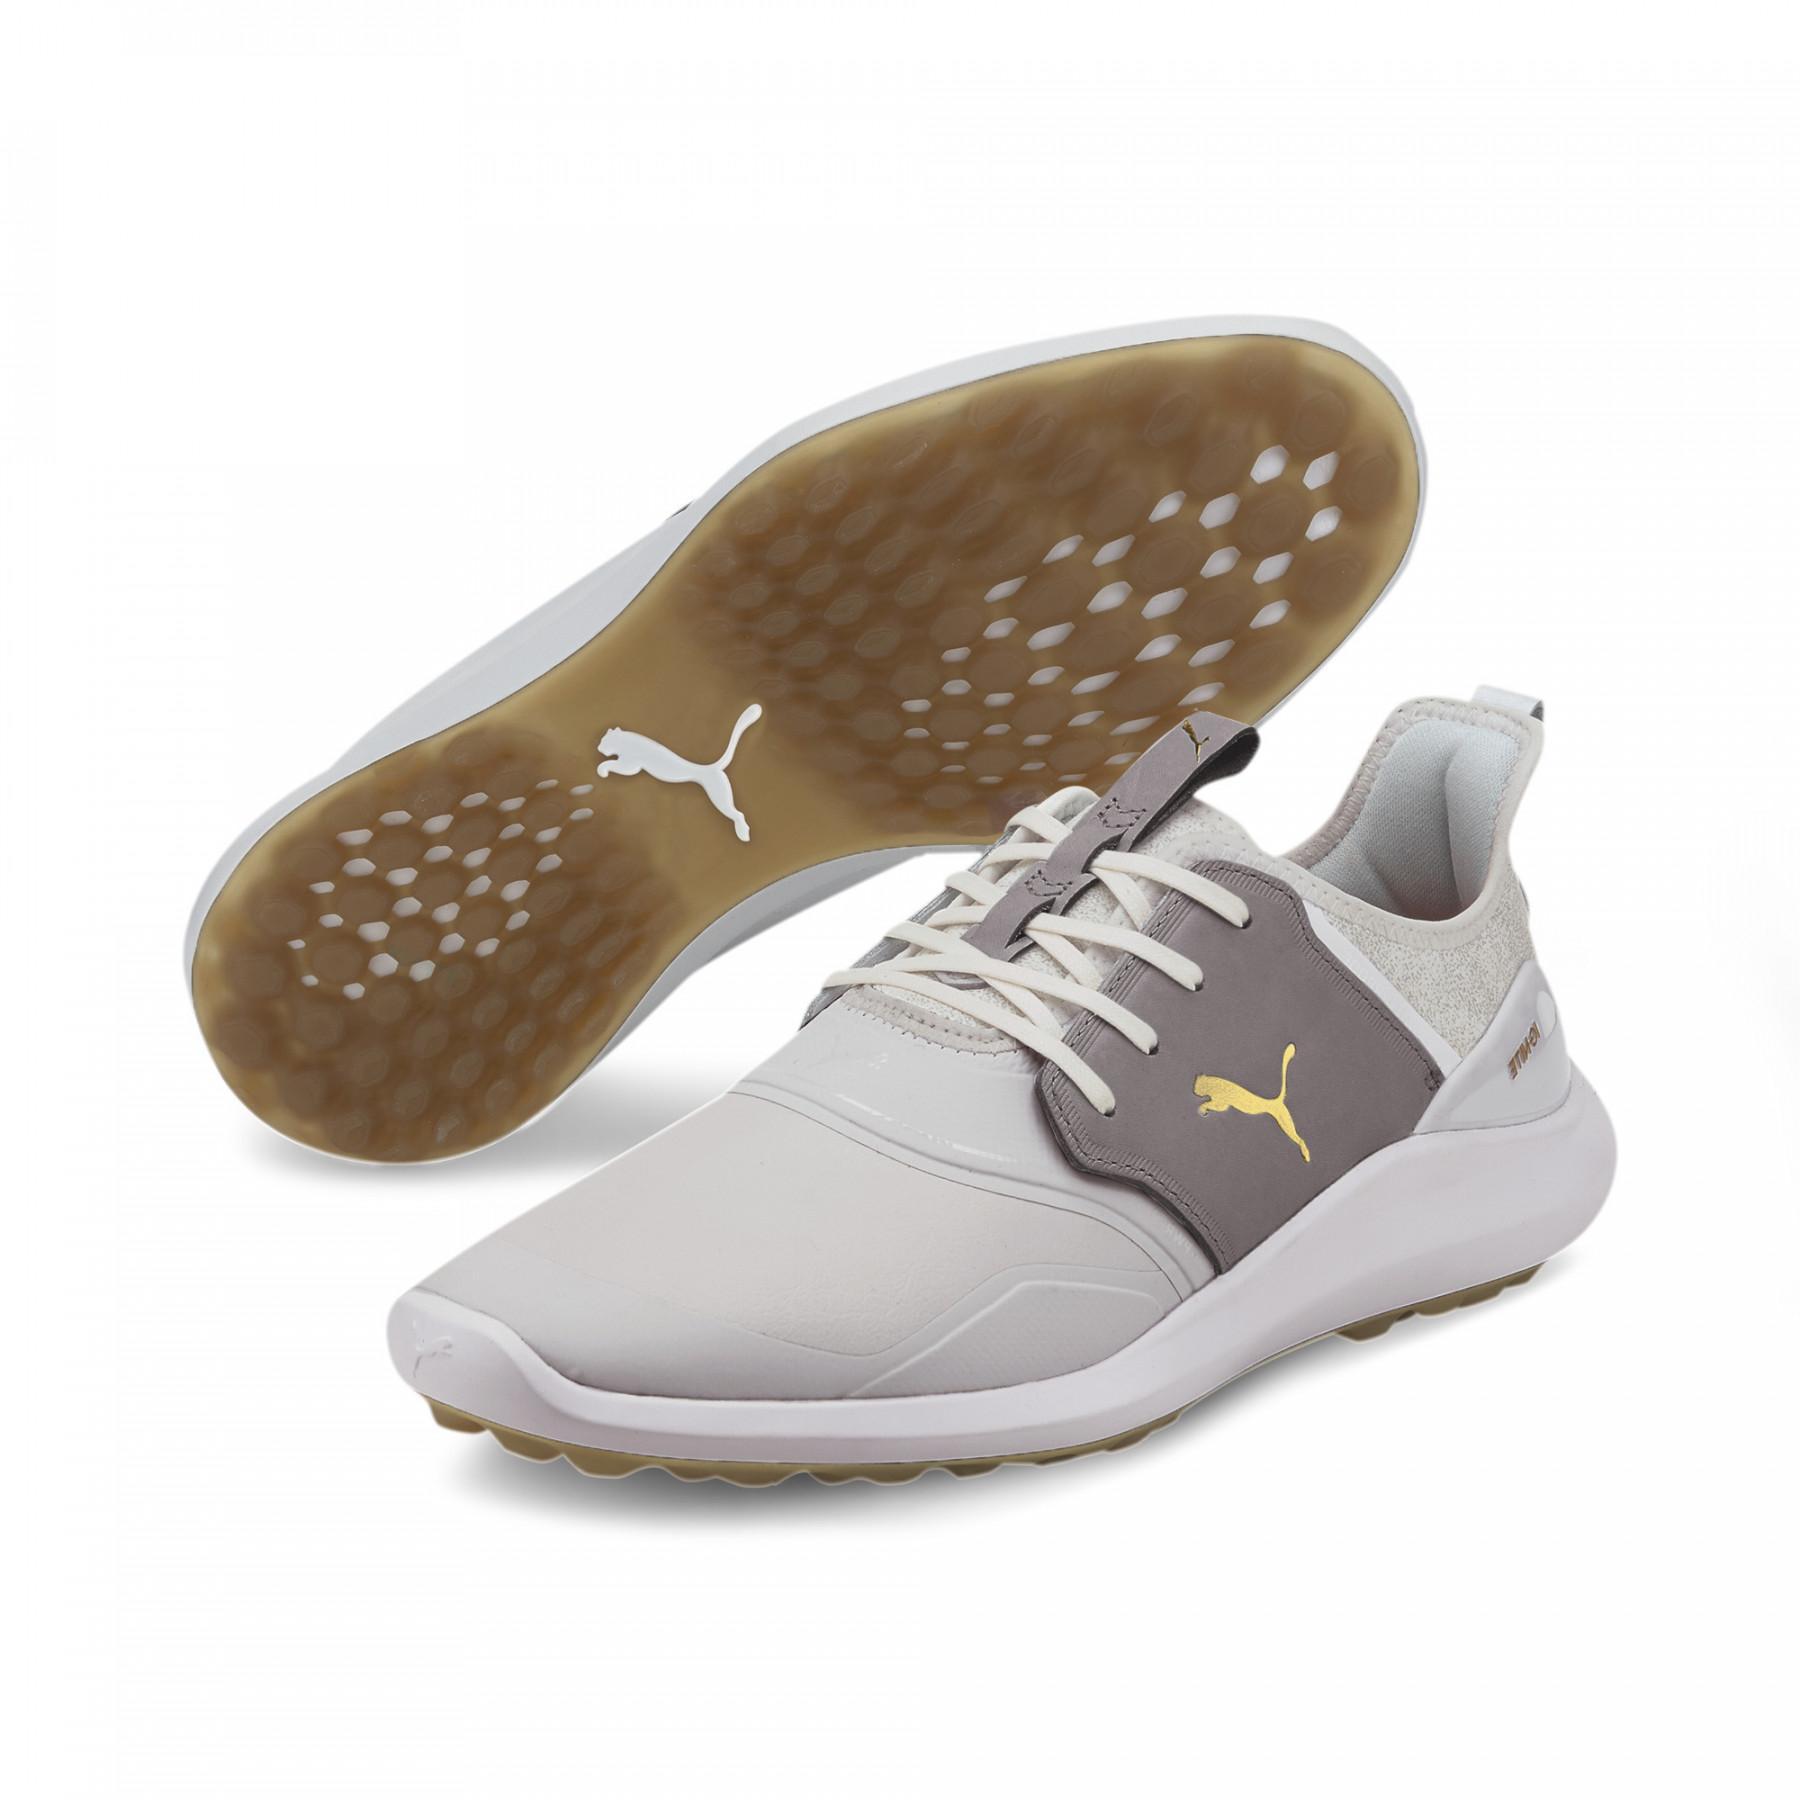 Chaussures Puma Ignite Nxt Crafted